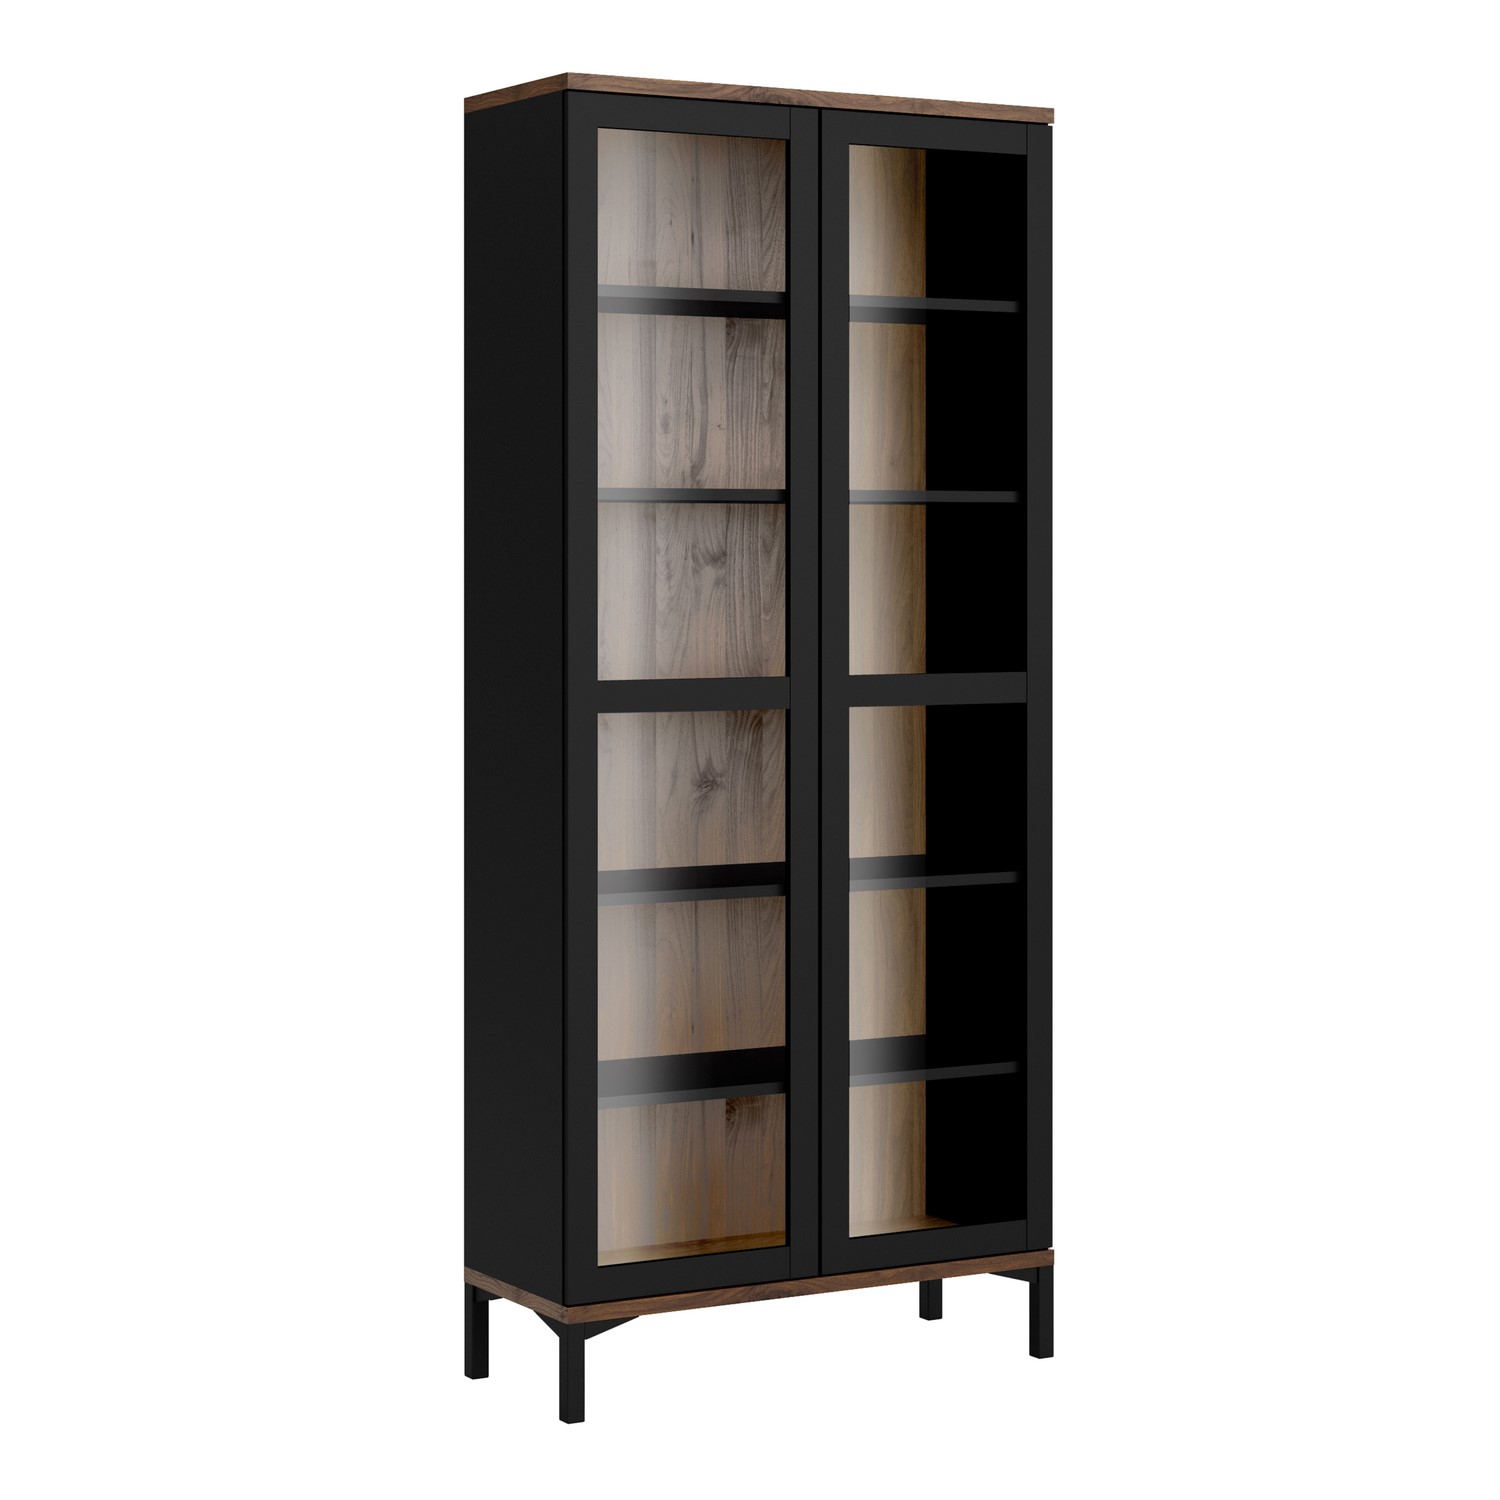 Read more about Tall black and walnut display cabinet with glass doors roomers